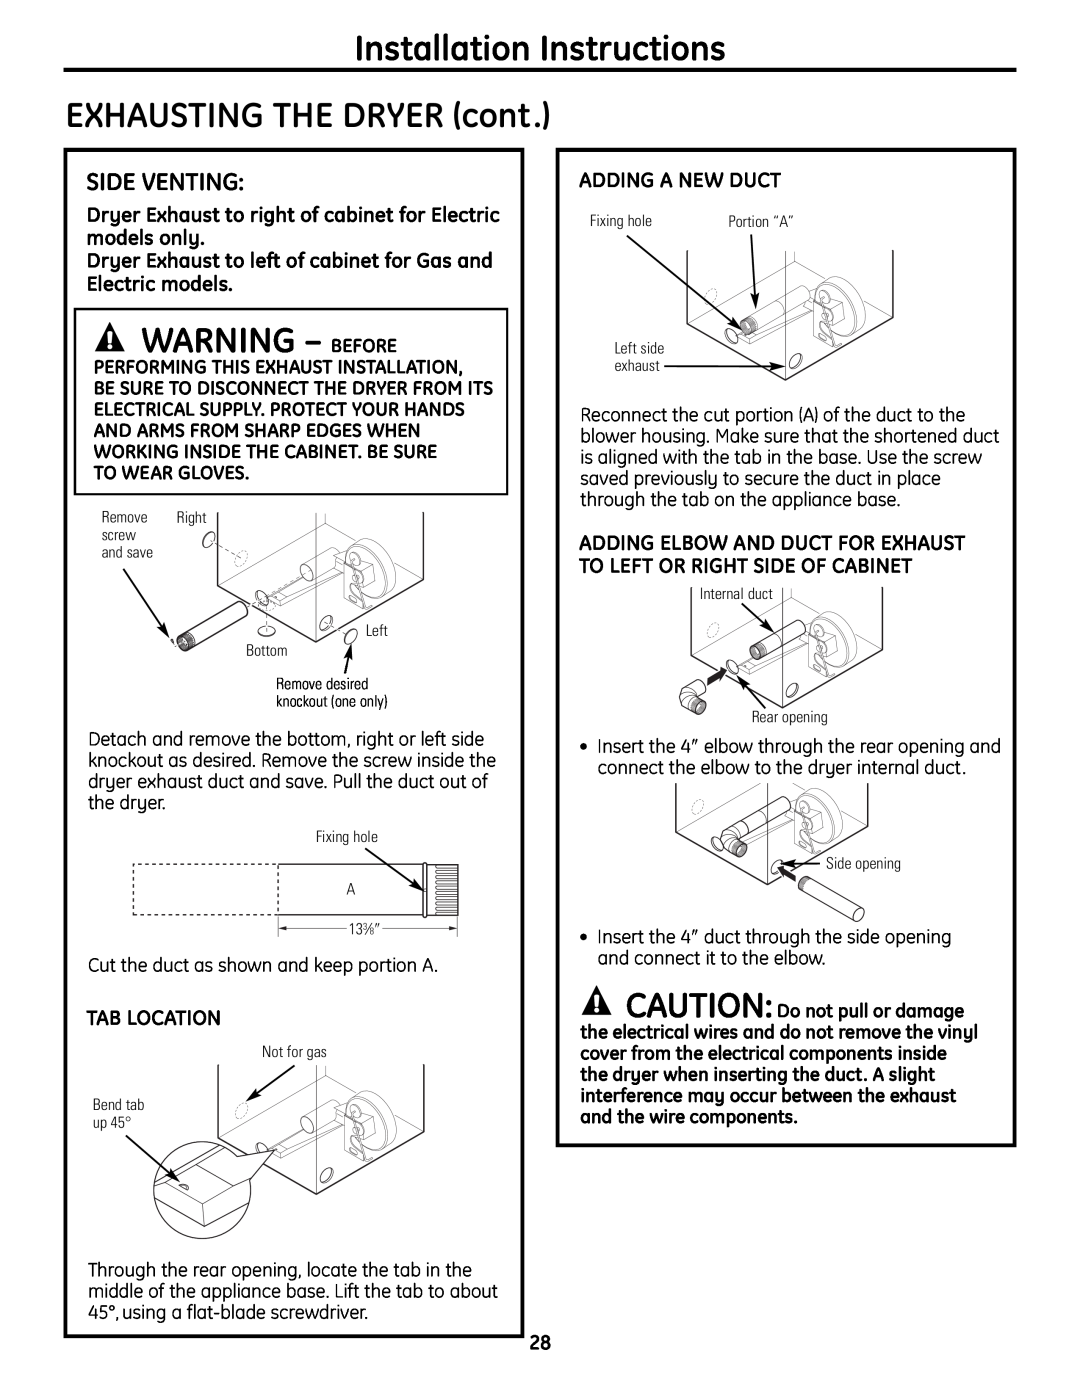 GE UPVH890 Installation Instructions EXHAUSTING THE DRYER cont, Warning - Before, Side Venting, Tab Location 